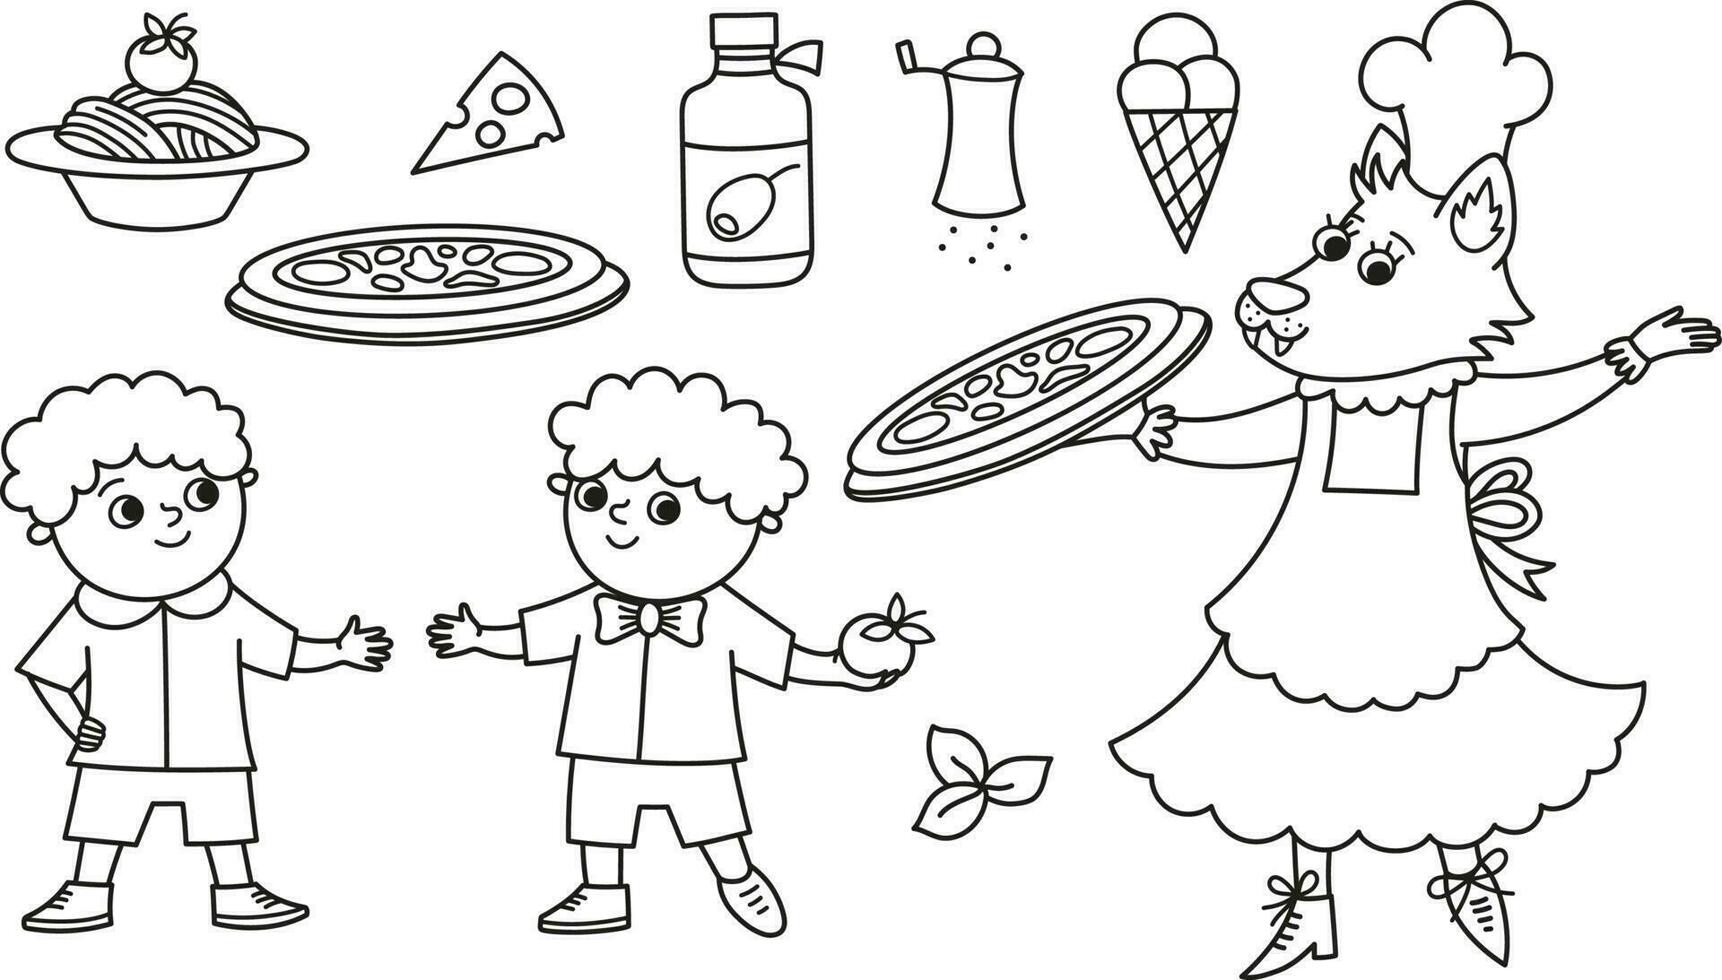 Black and white set with cook wolf and two boys, pizza, gelato, spaghetti, olive oil. Coloring page for Italian cuisine restaurant. Traditional Rome food and chef illustration. Funny clipart for kids vector